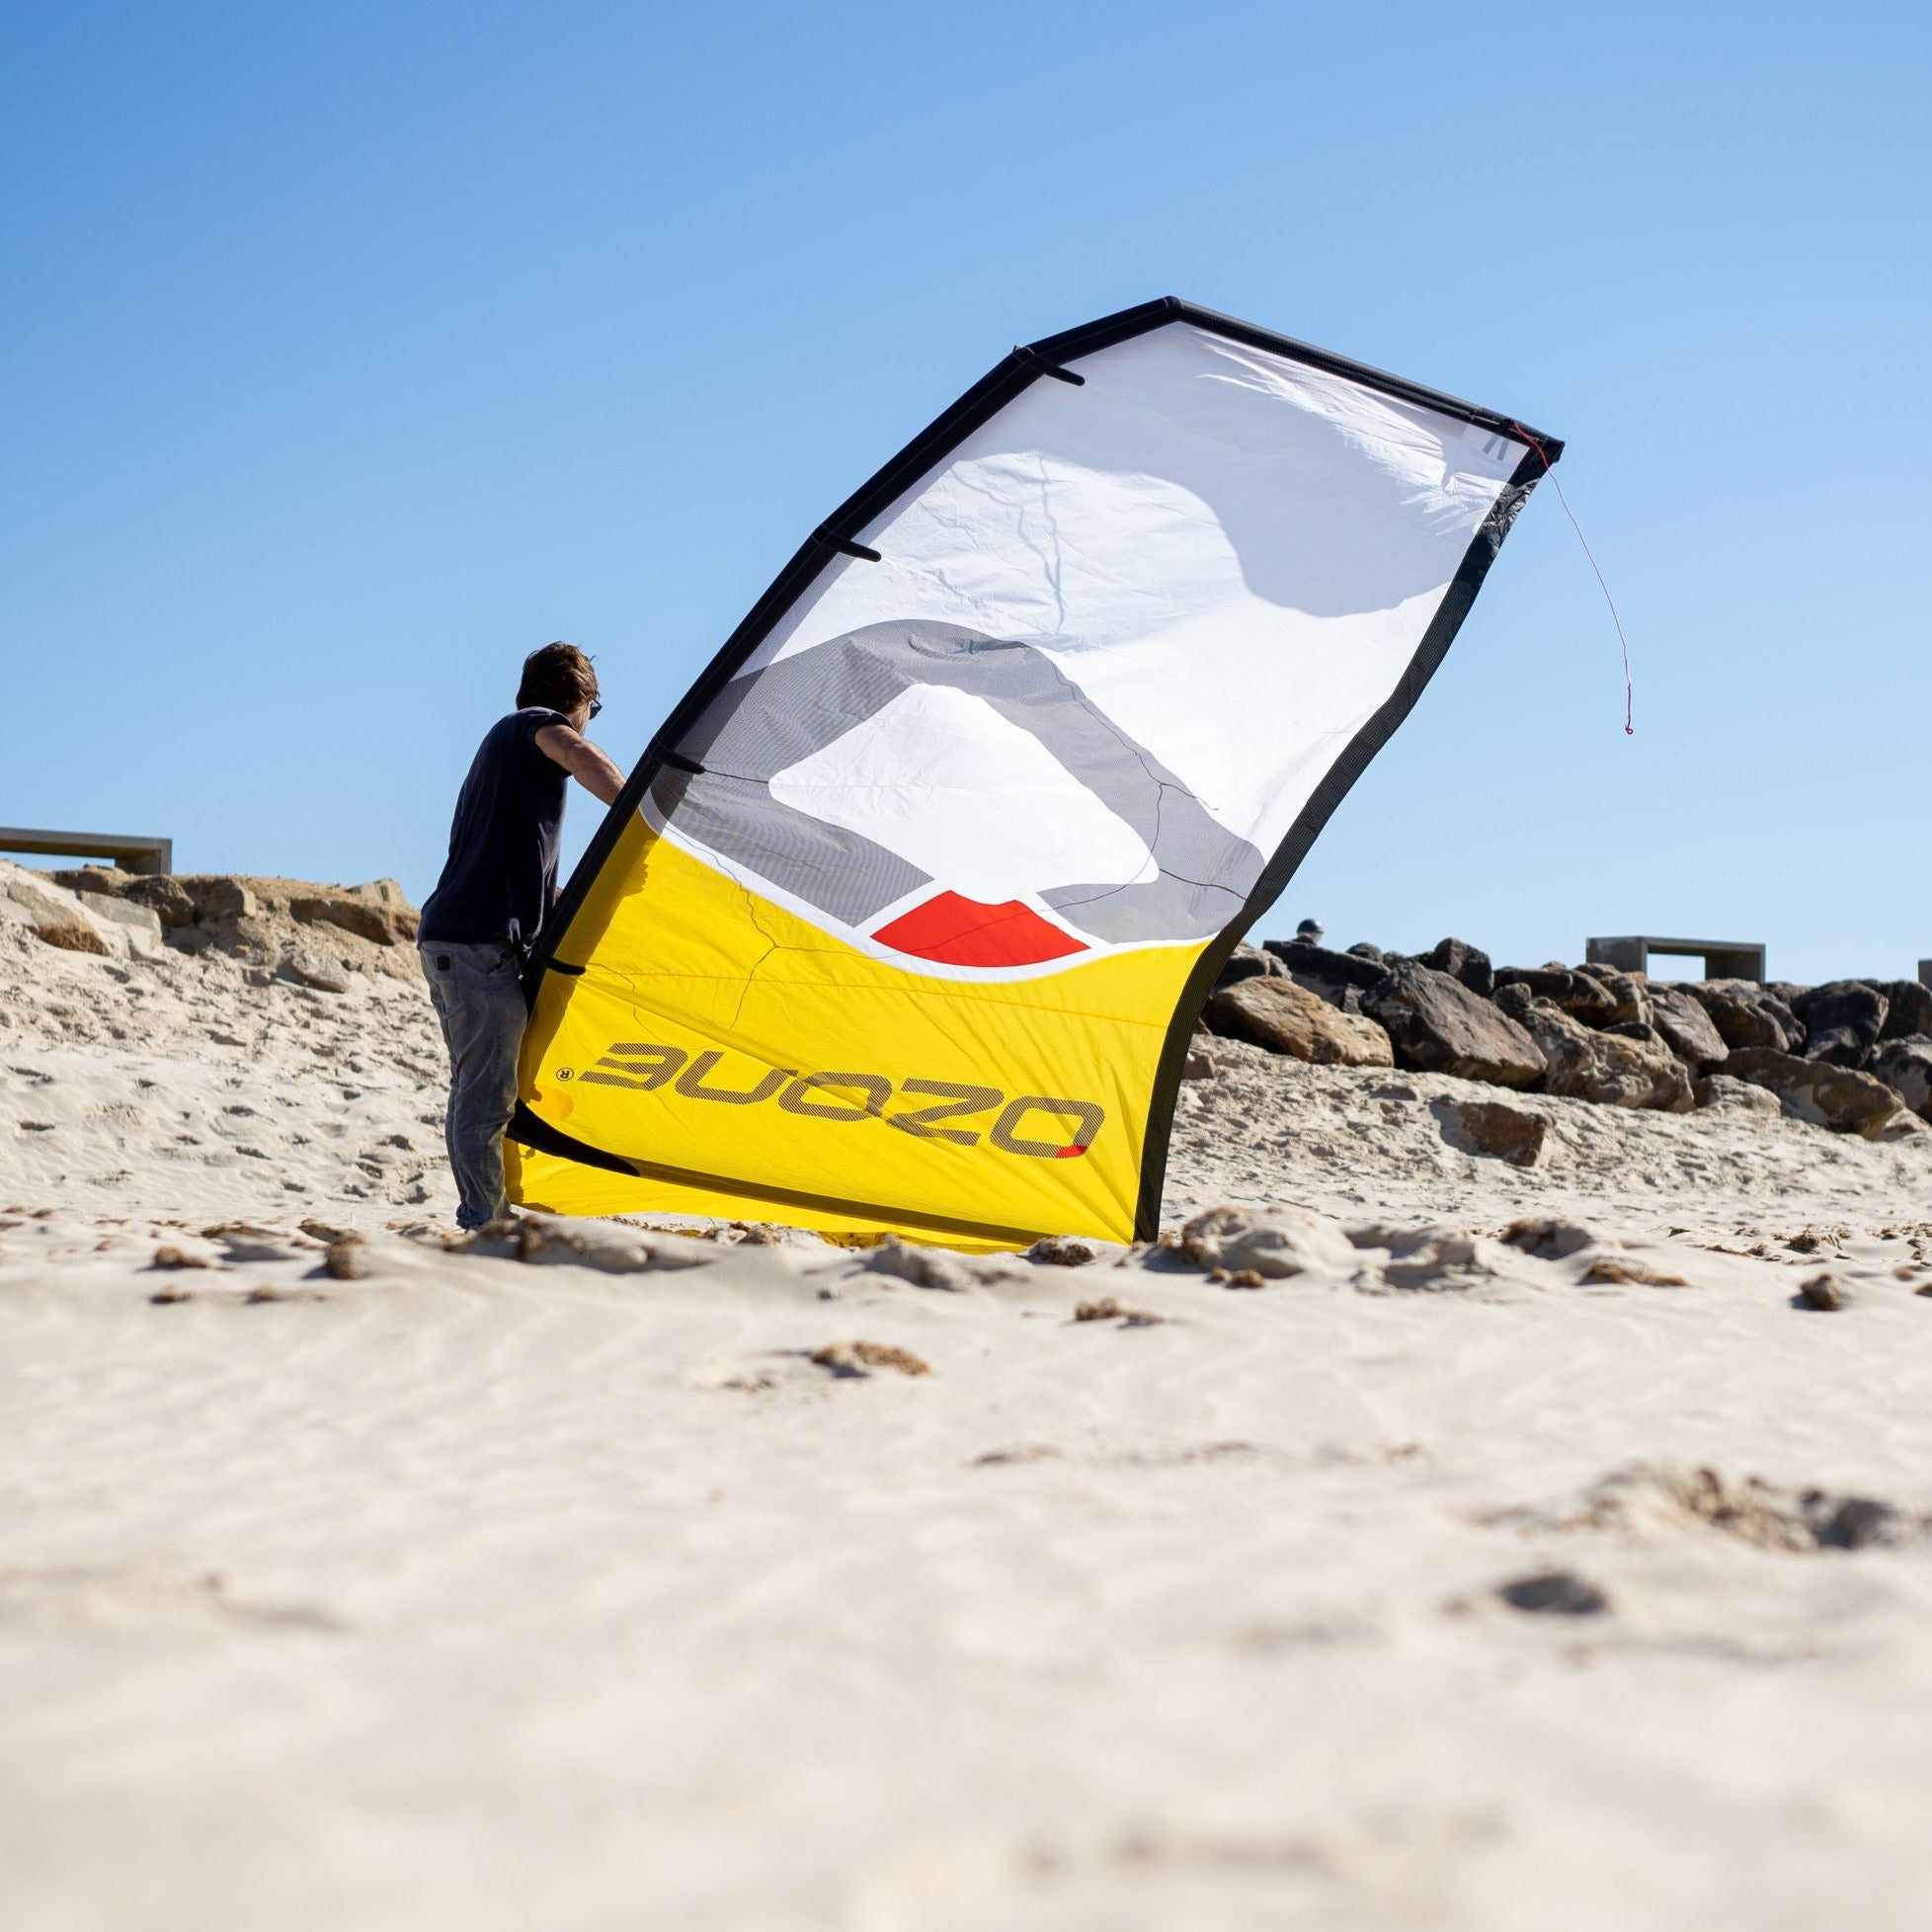 A kitesurfer pumping up the yellow Ozone Catalyst V3 on a sandy beach.